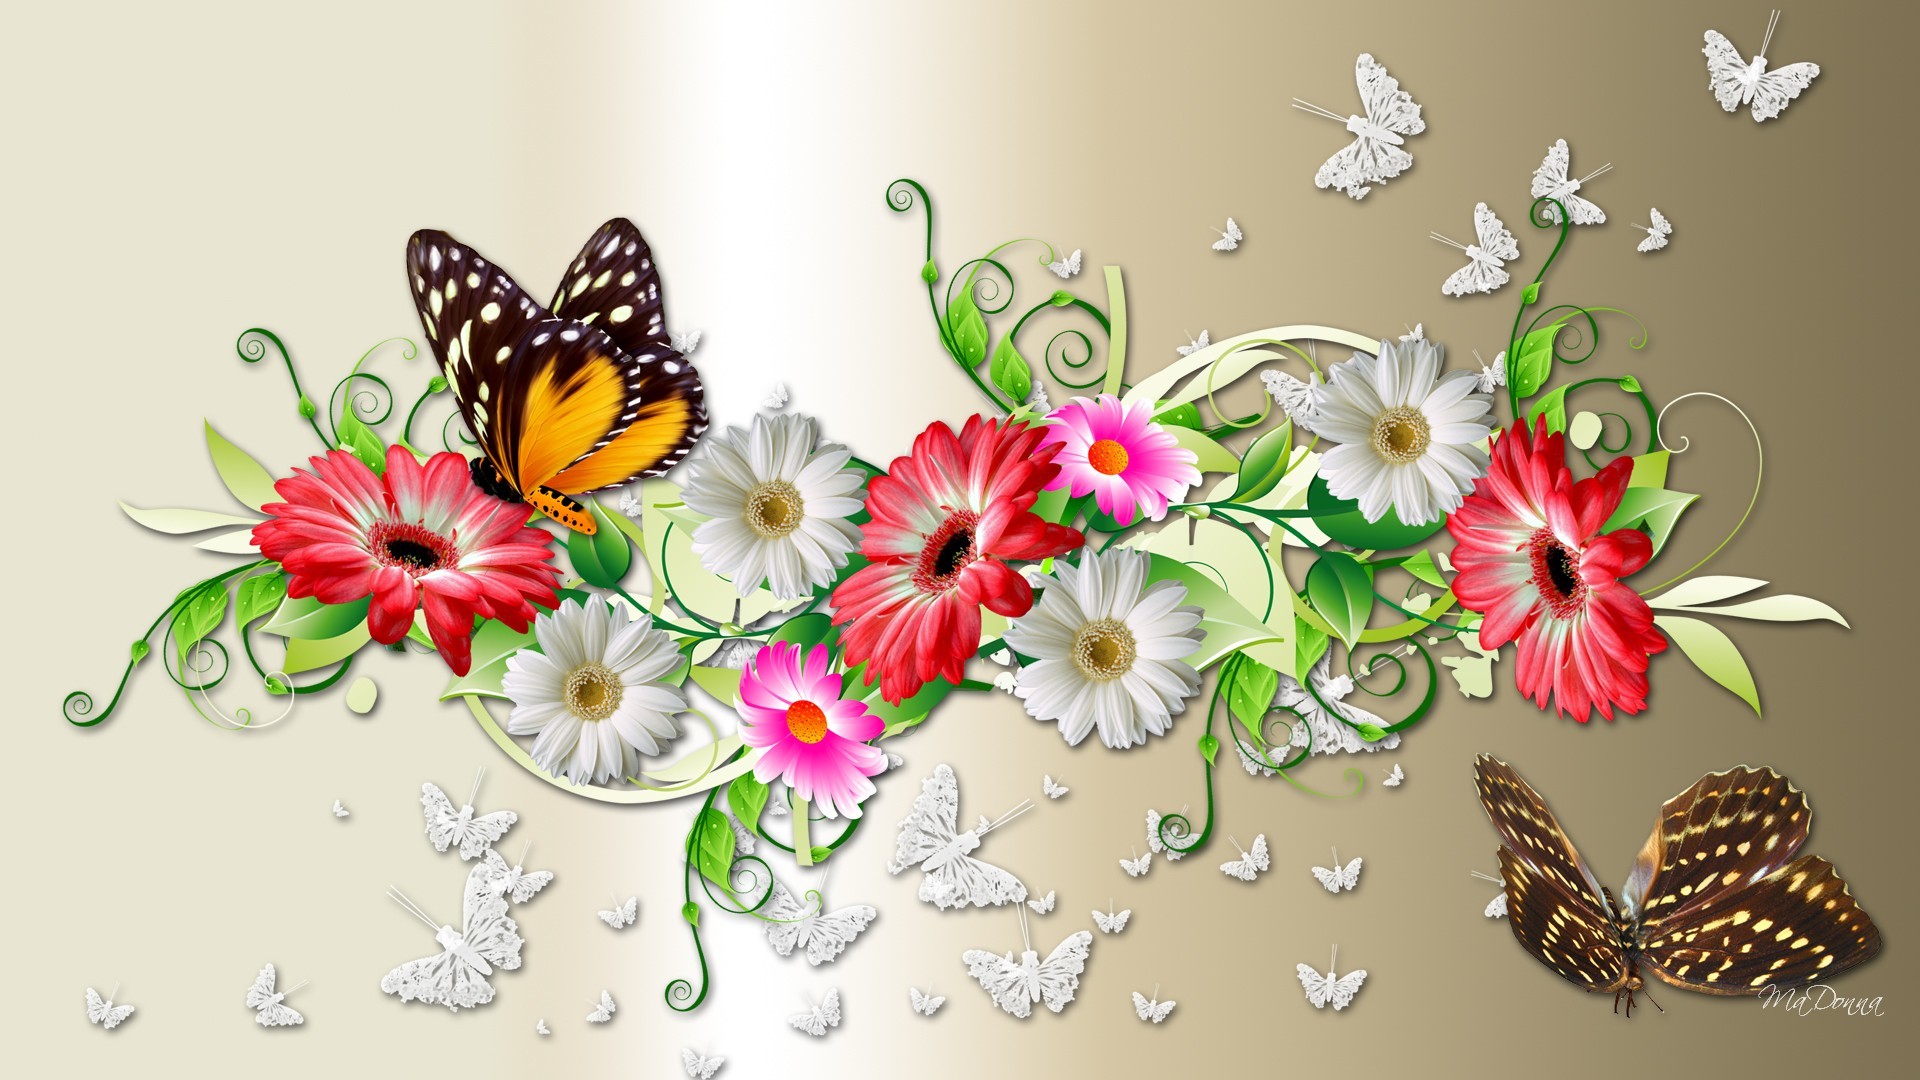 Spring Flowers And Butterflies Background 1920x1080